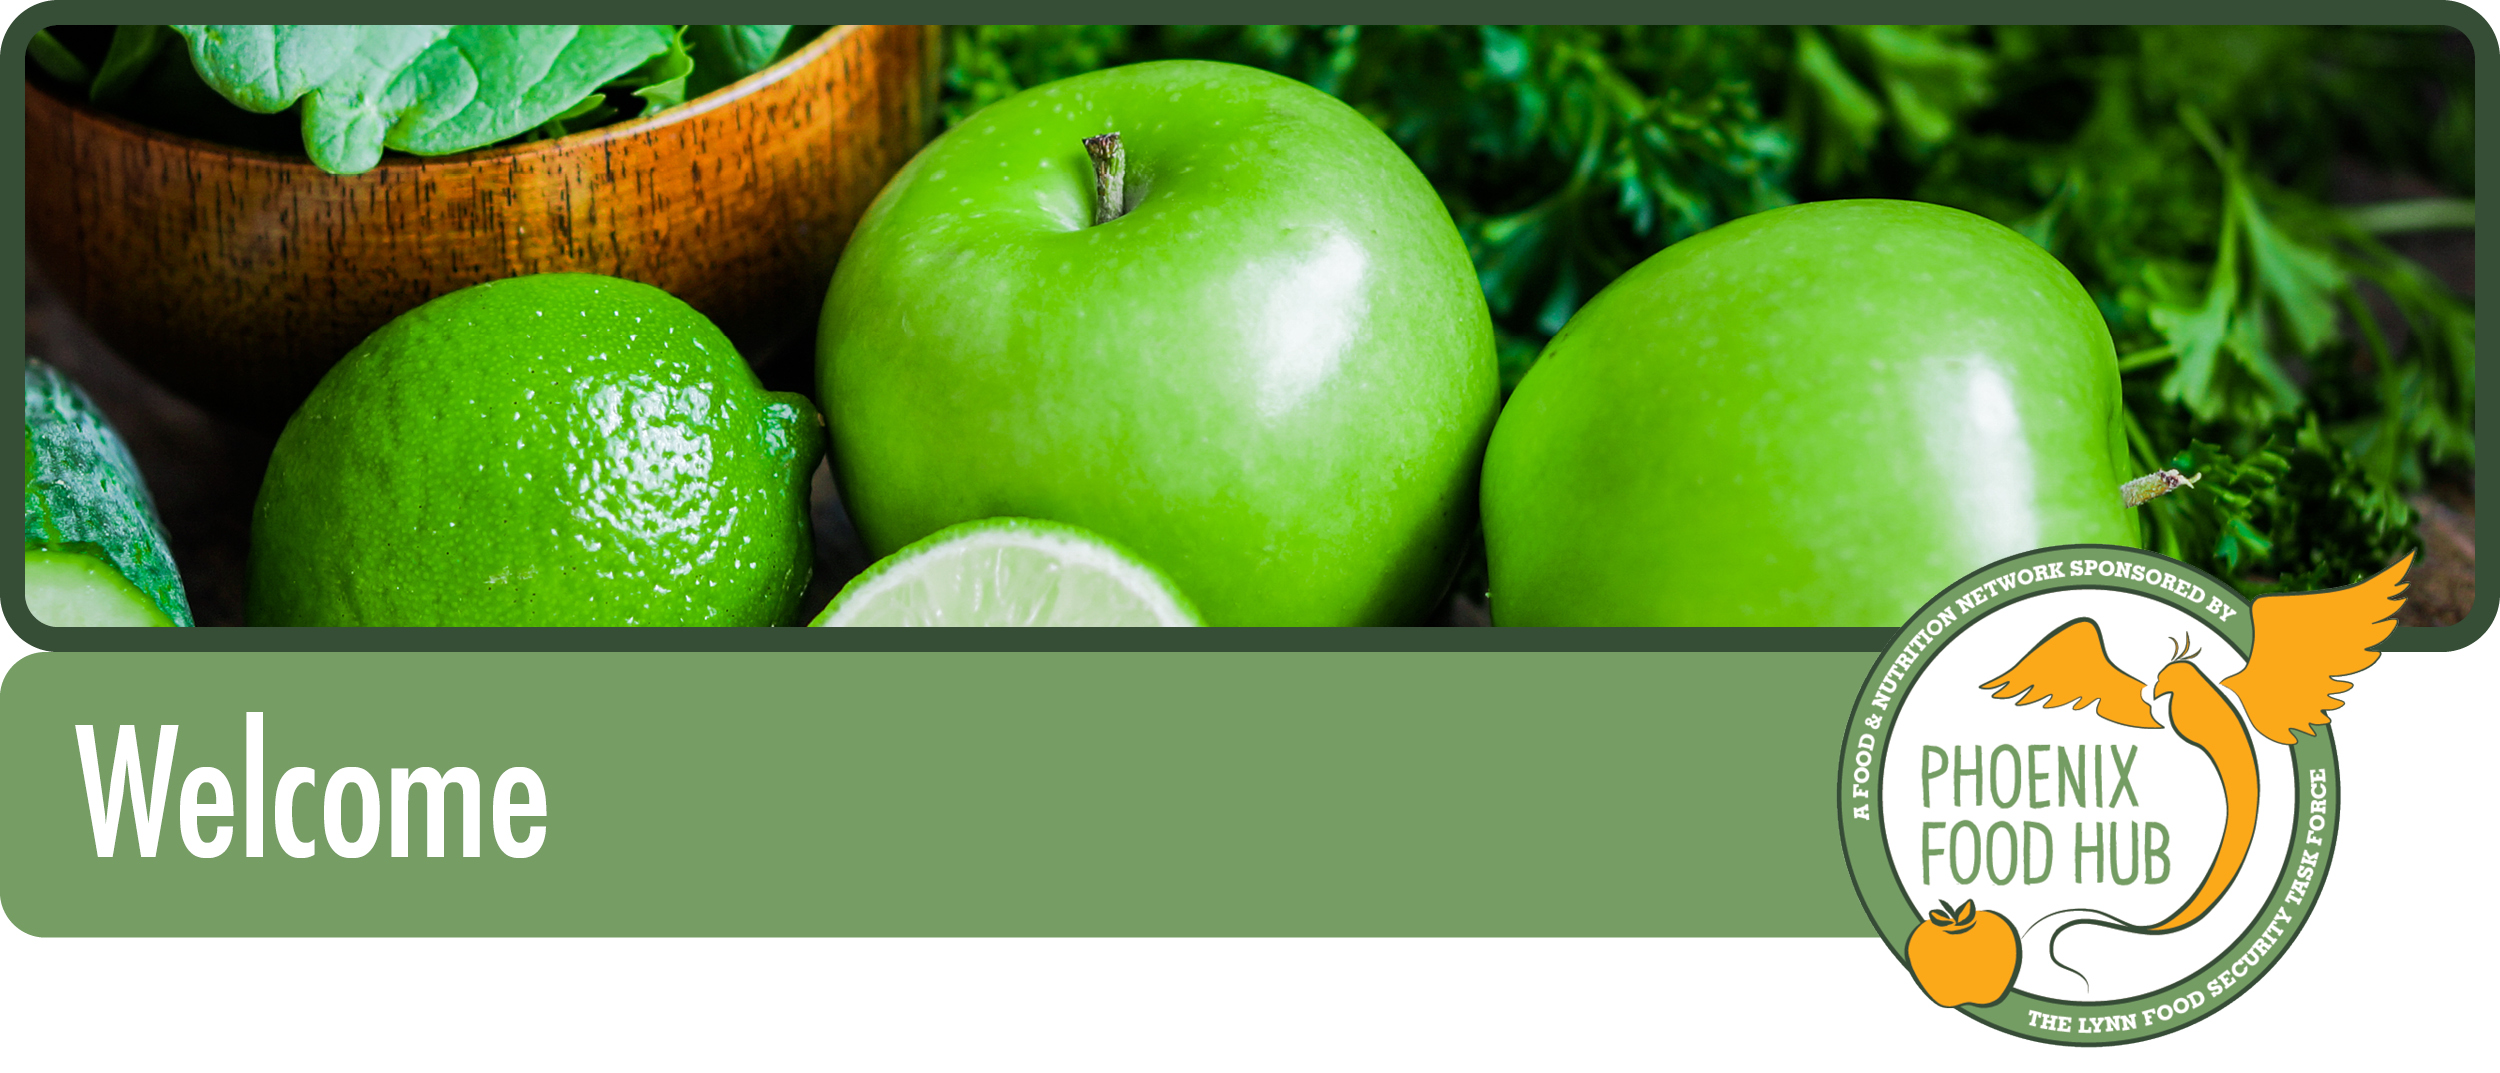 Banner image of green apples and vegetables